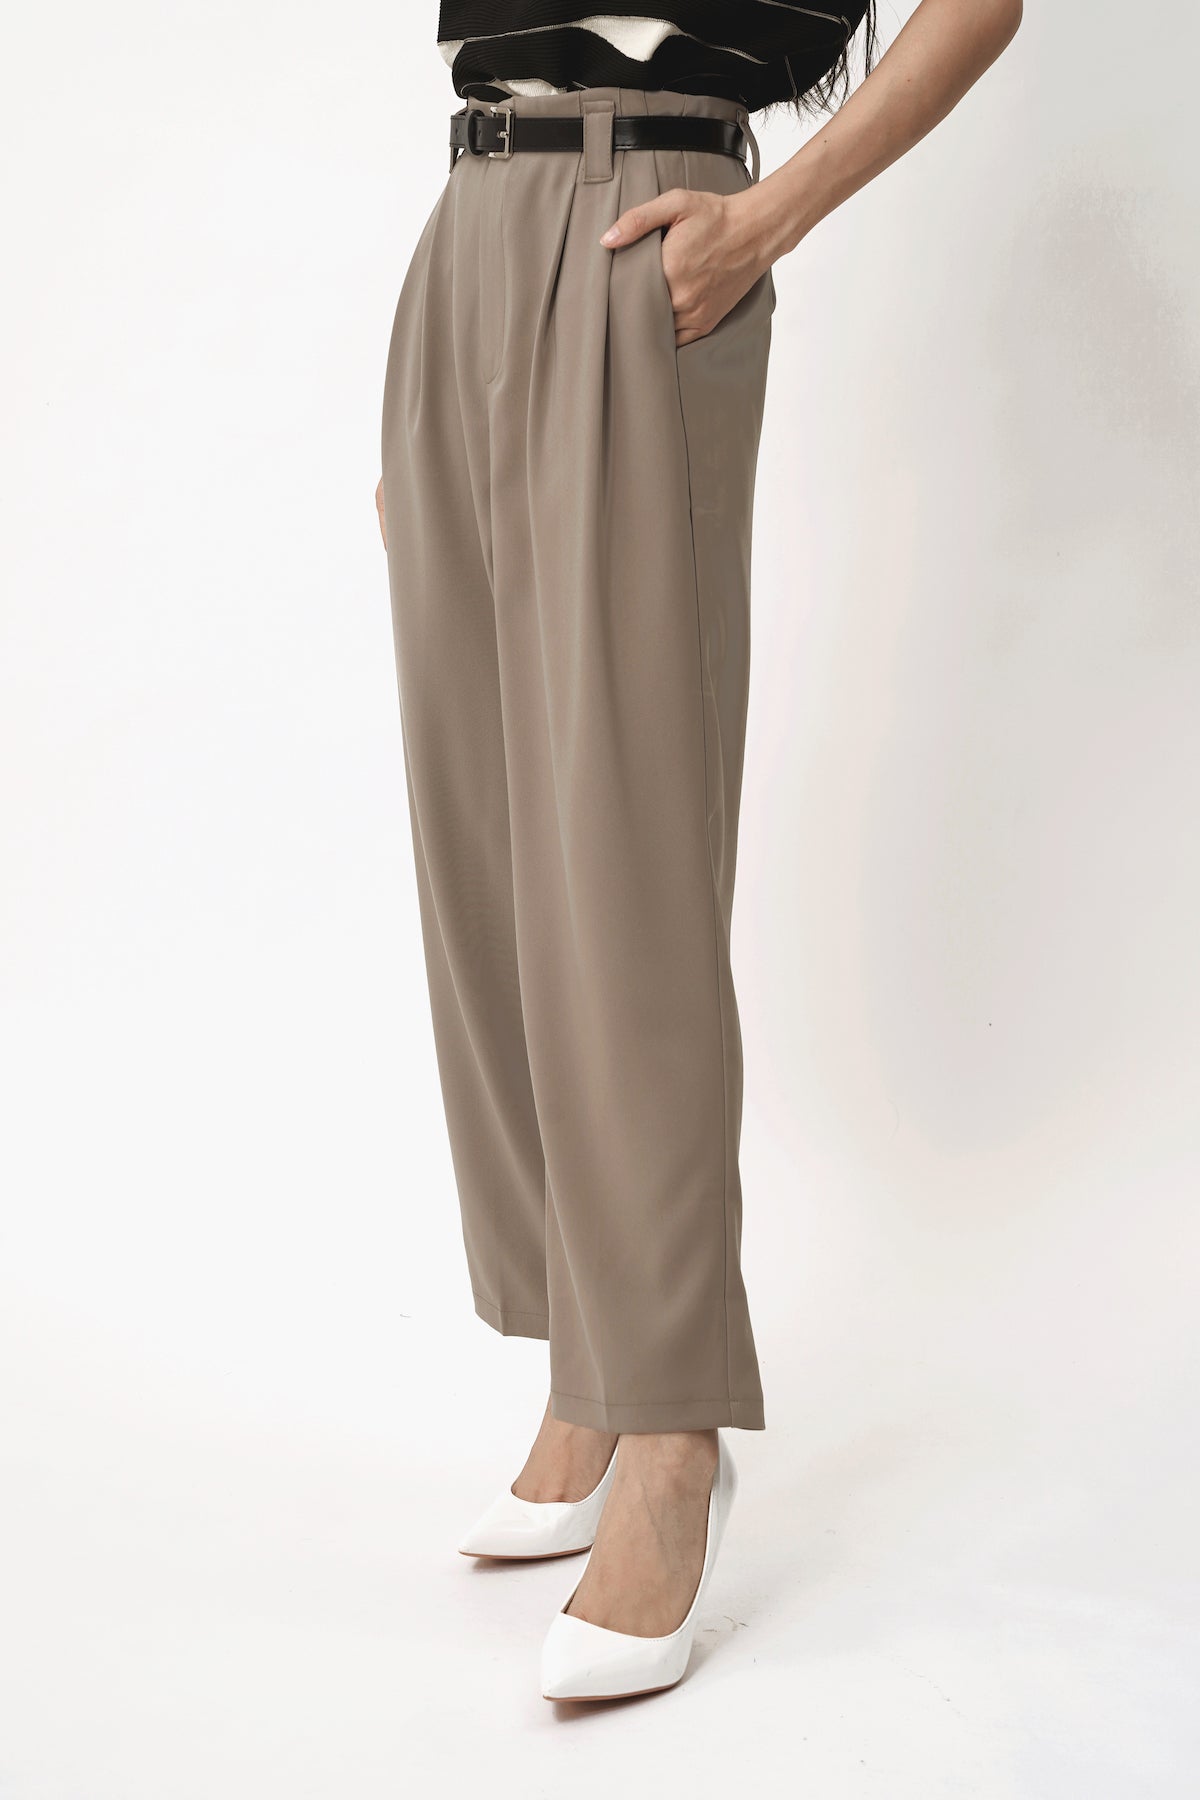 Lewis Pants In Taupe (LAST PIECE)